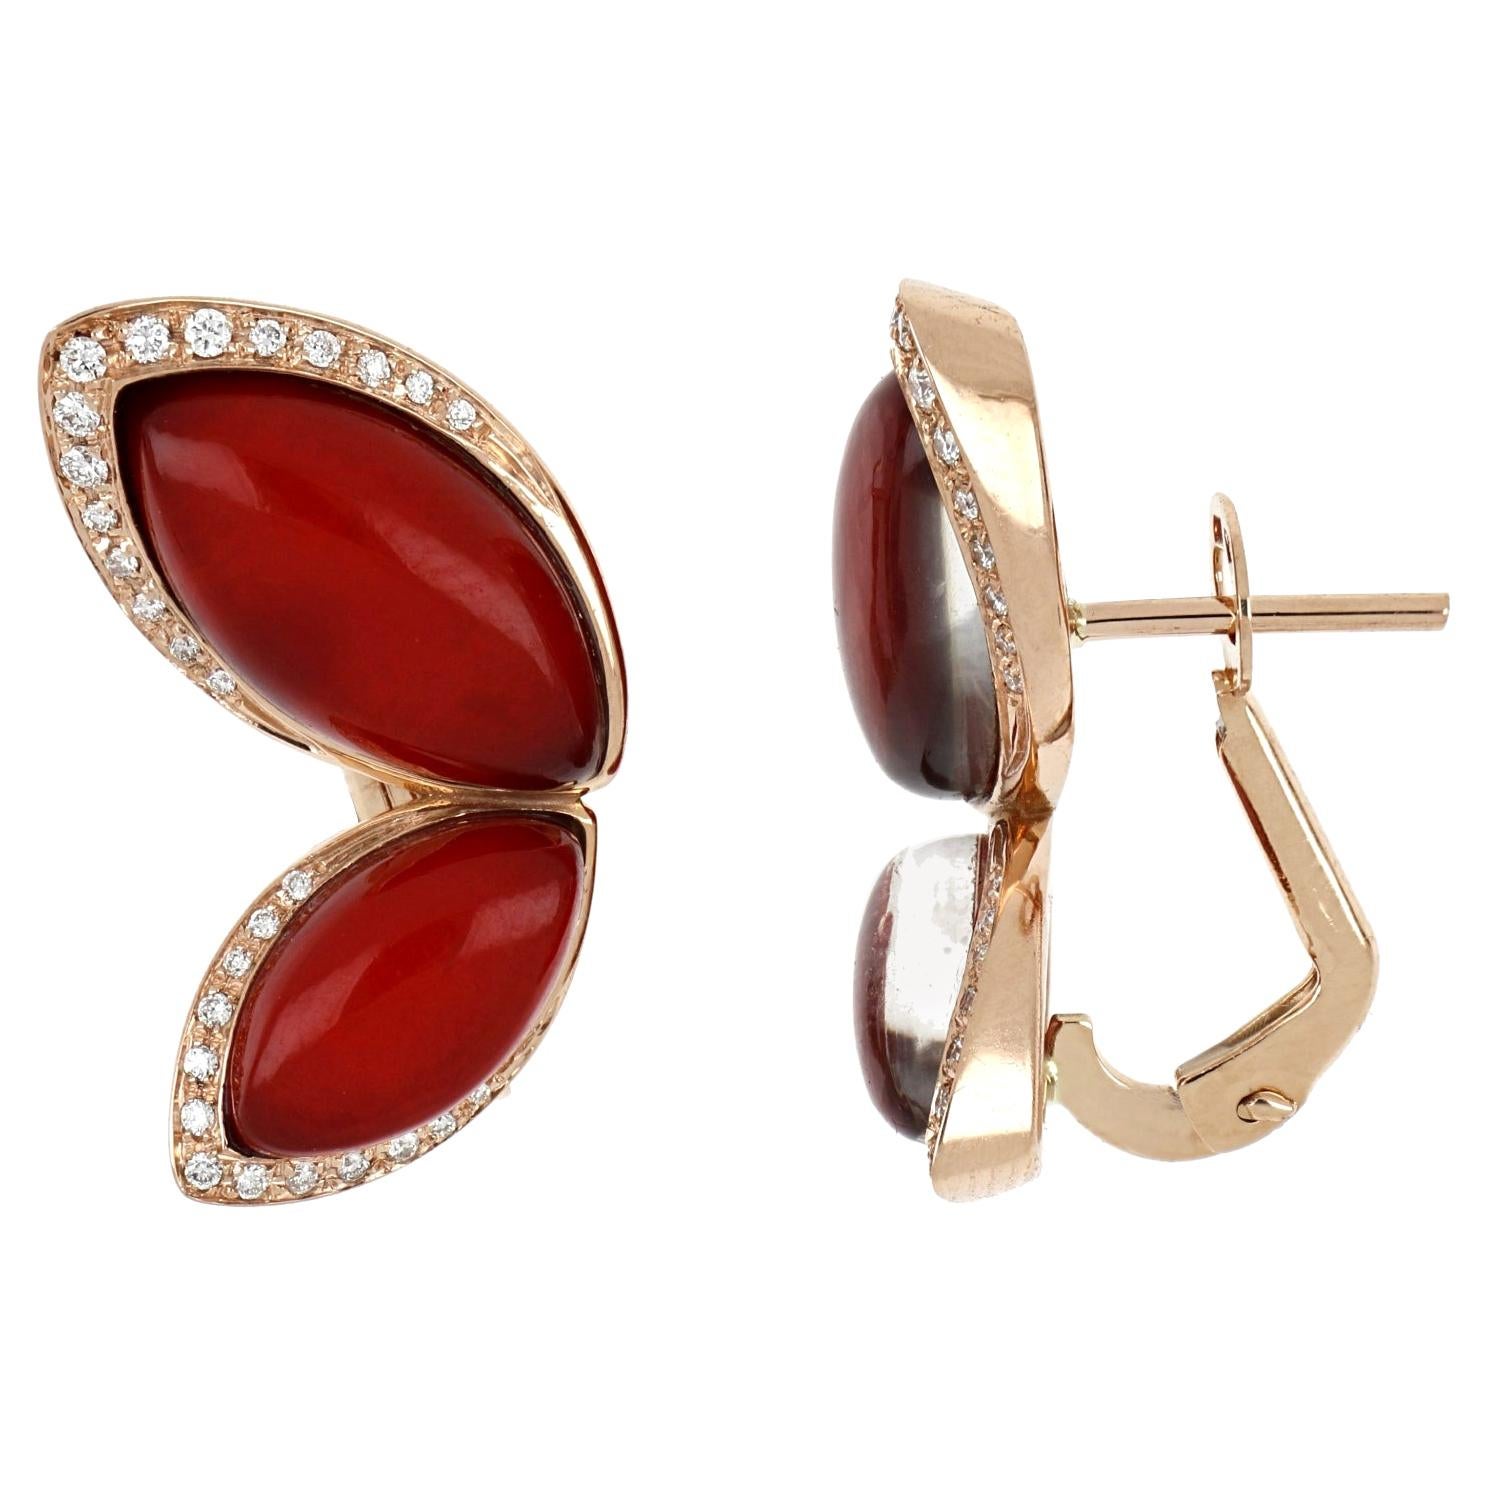 18kt Rose Gold Les Papillons Earrings with Red Aventurine and Diamonds